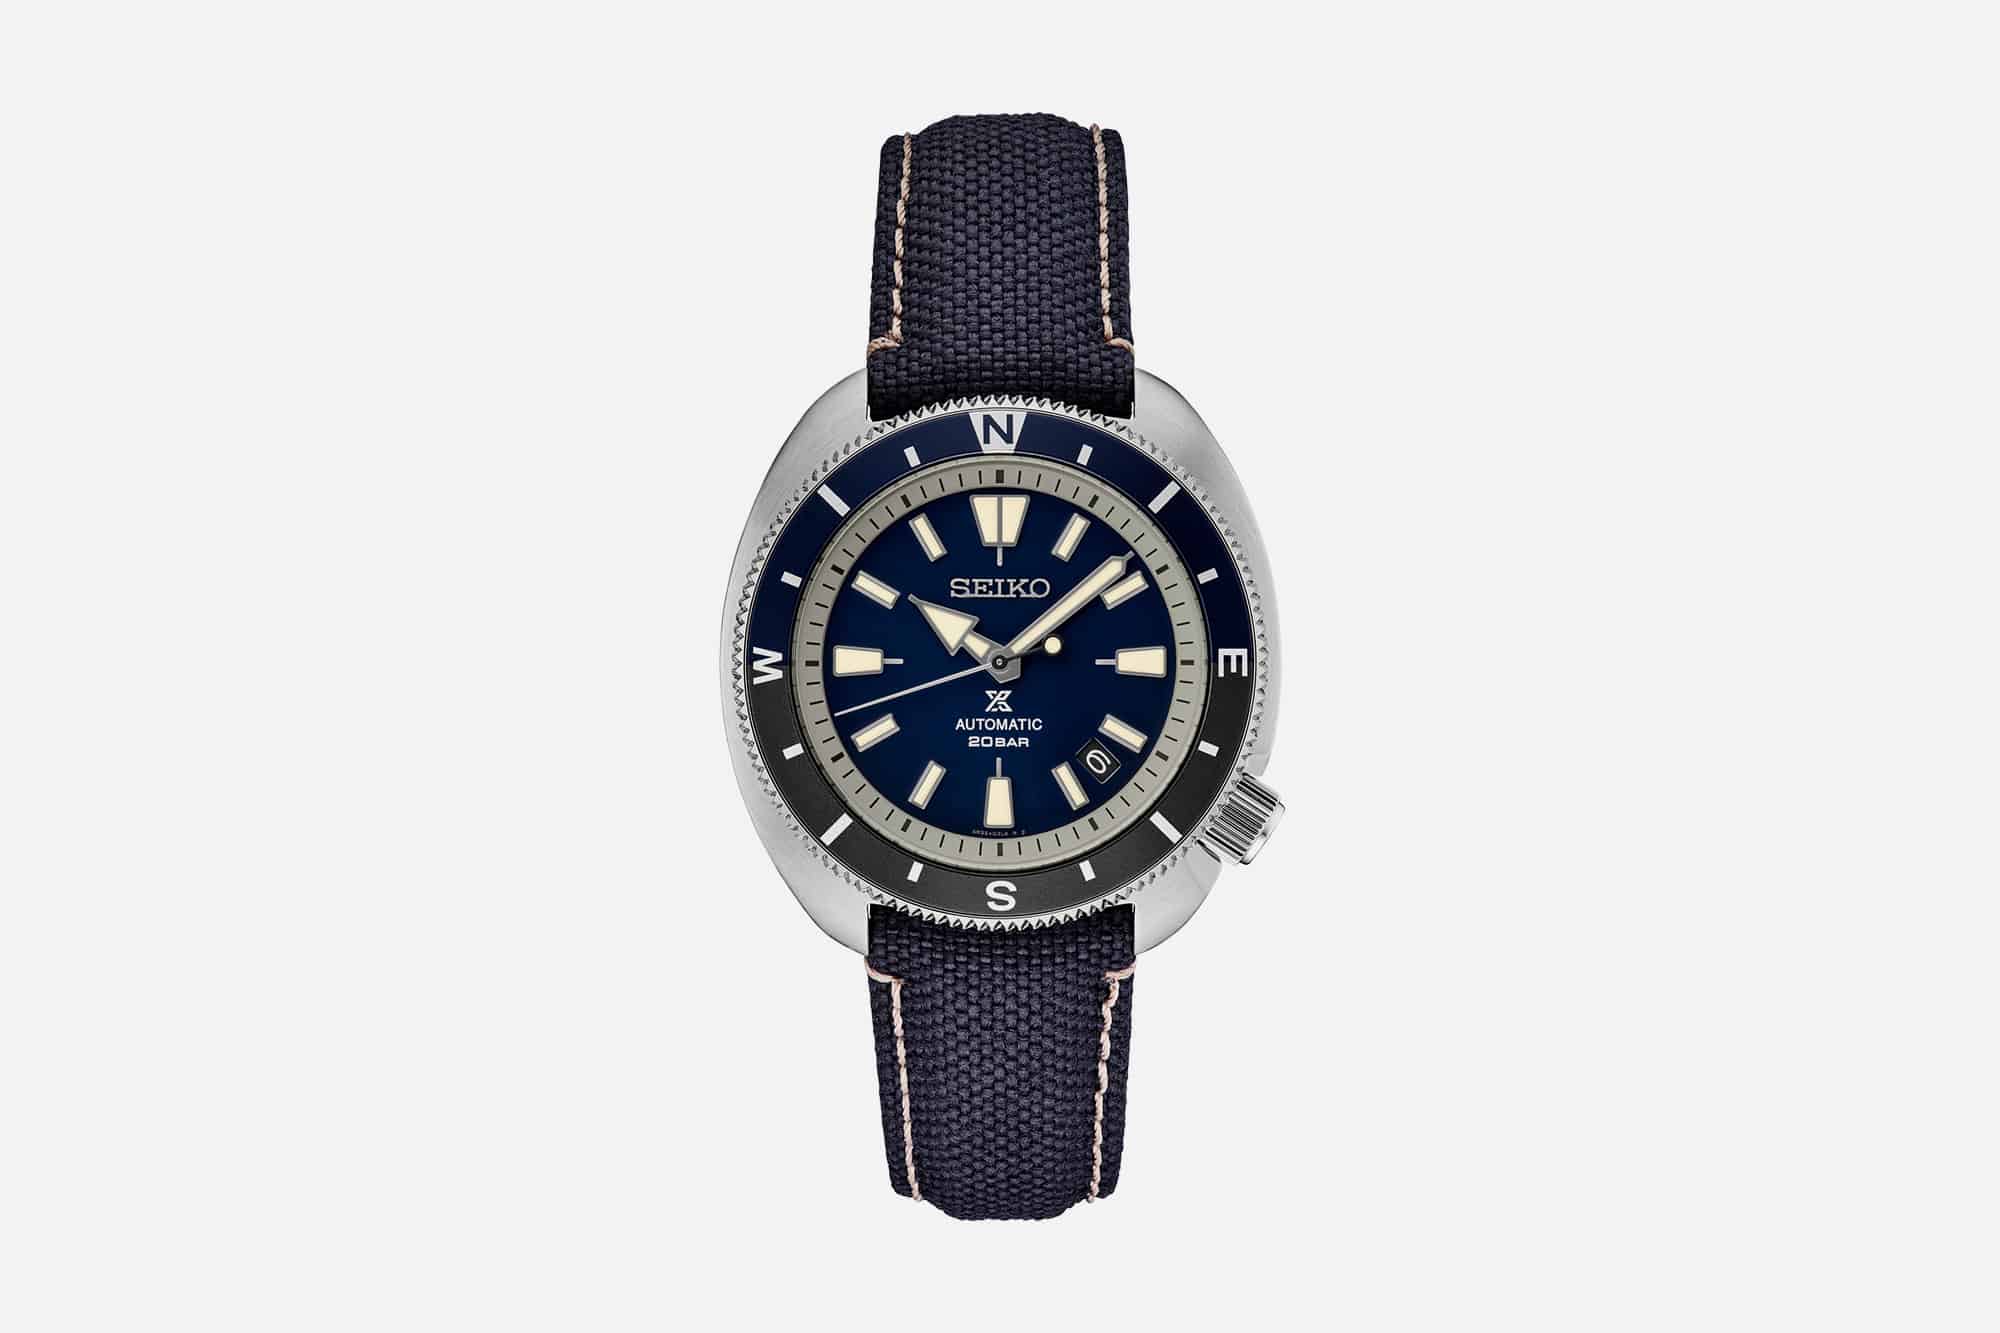 Introducing the Seiko “Land Tortoise,” a Diver with a Compass Bezel